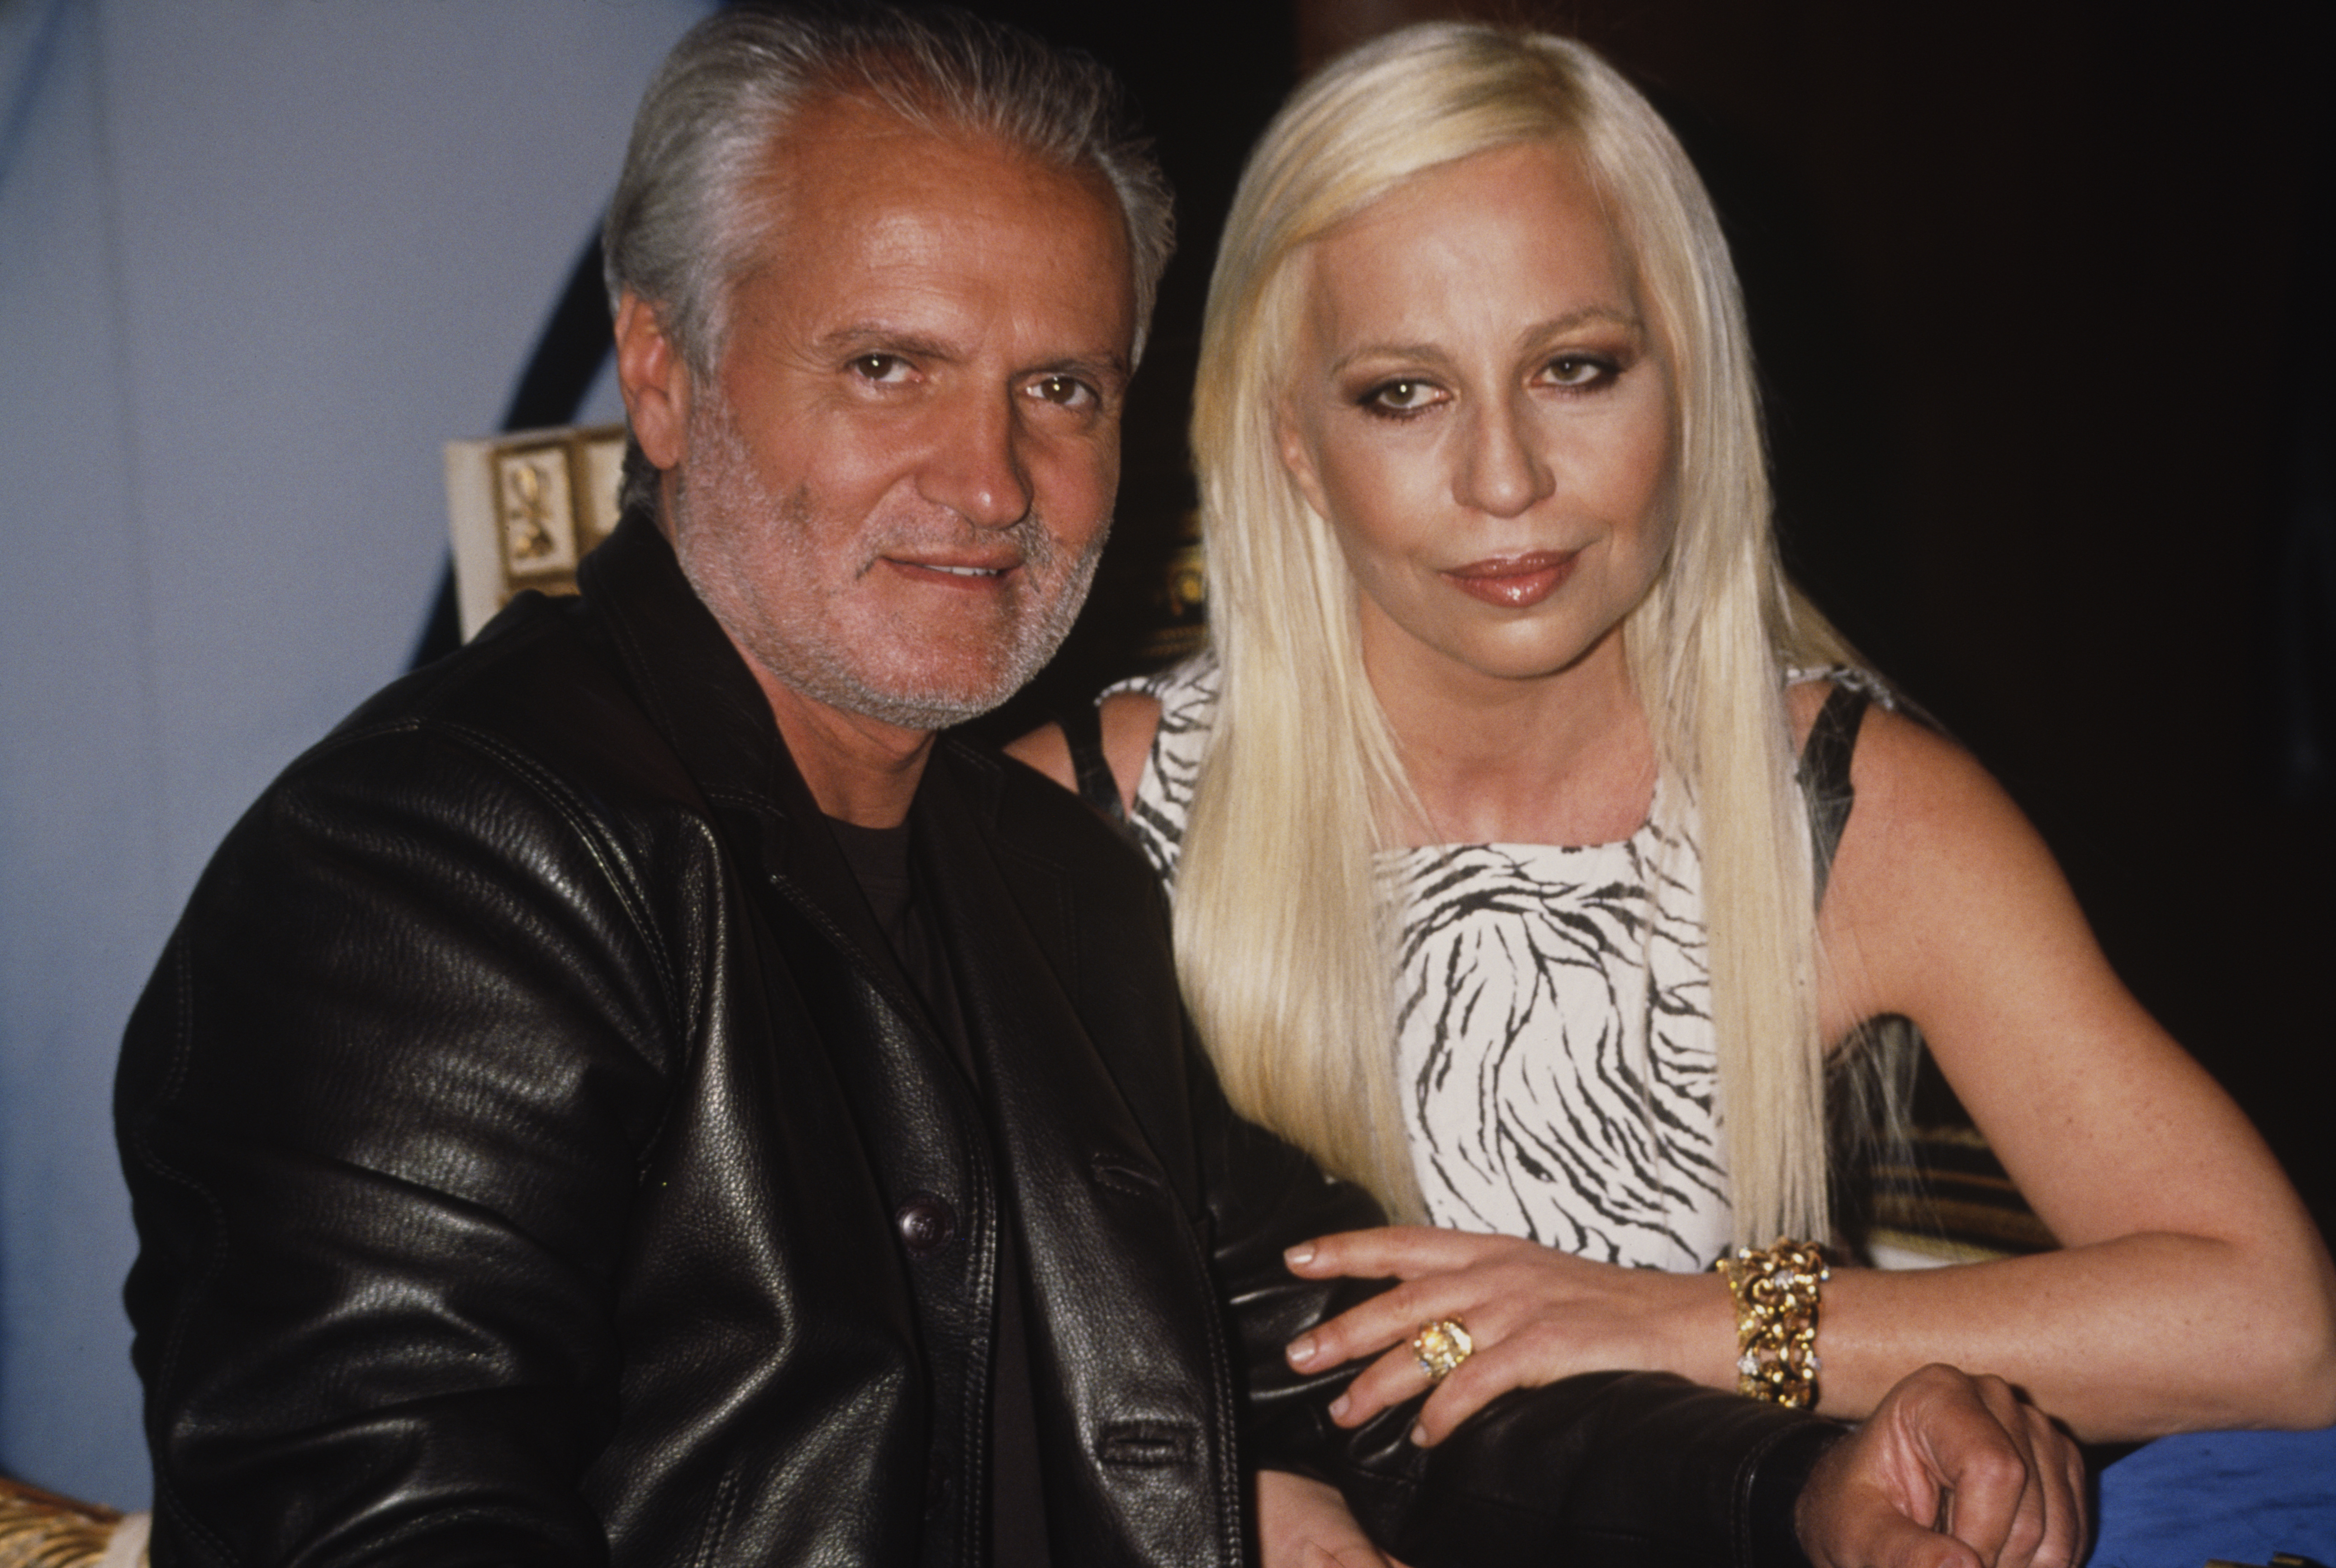 Gianni and Donatella Versace at the launch for their new fragrance "Versace's Blonde," circa, 1996 | Source: Getty Images